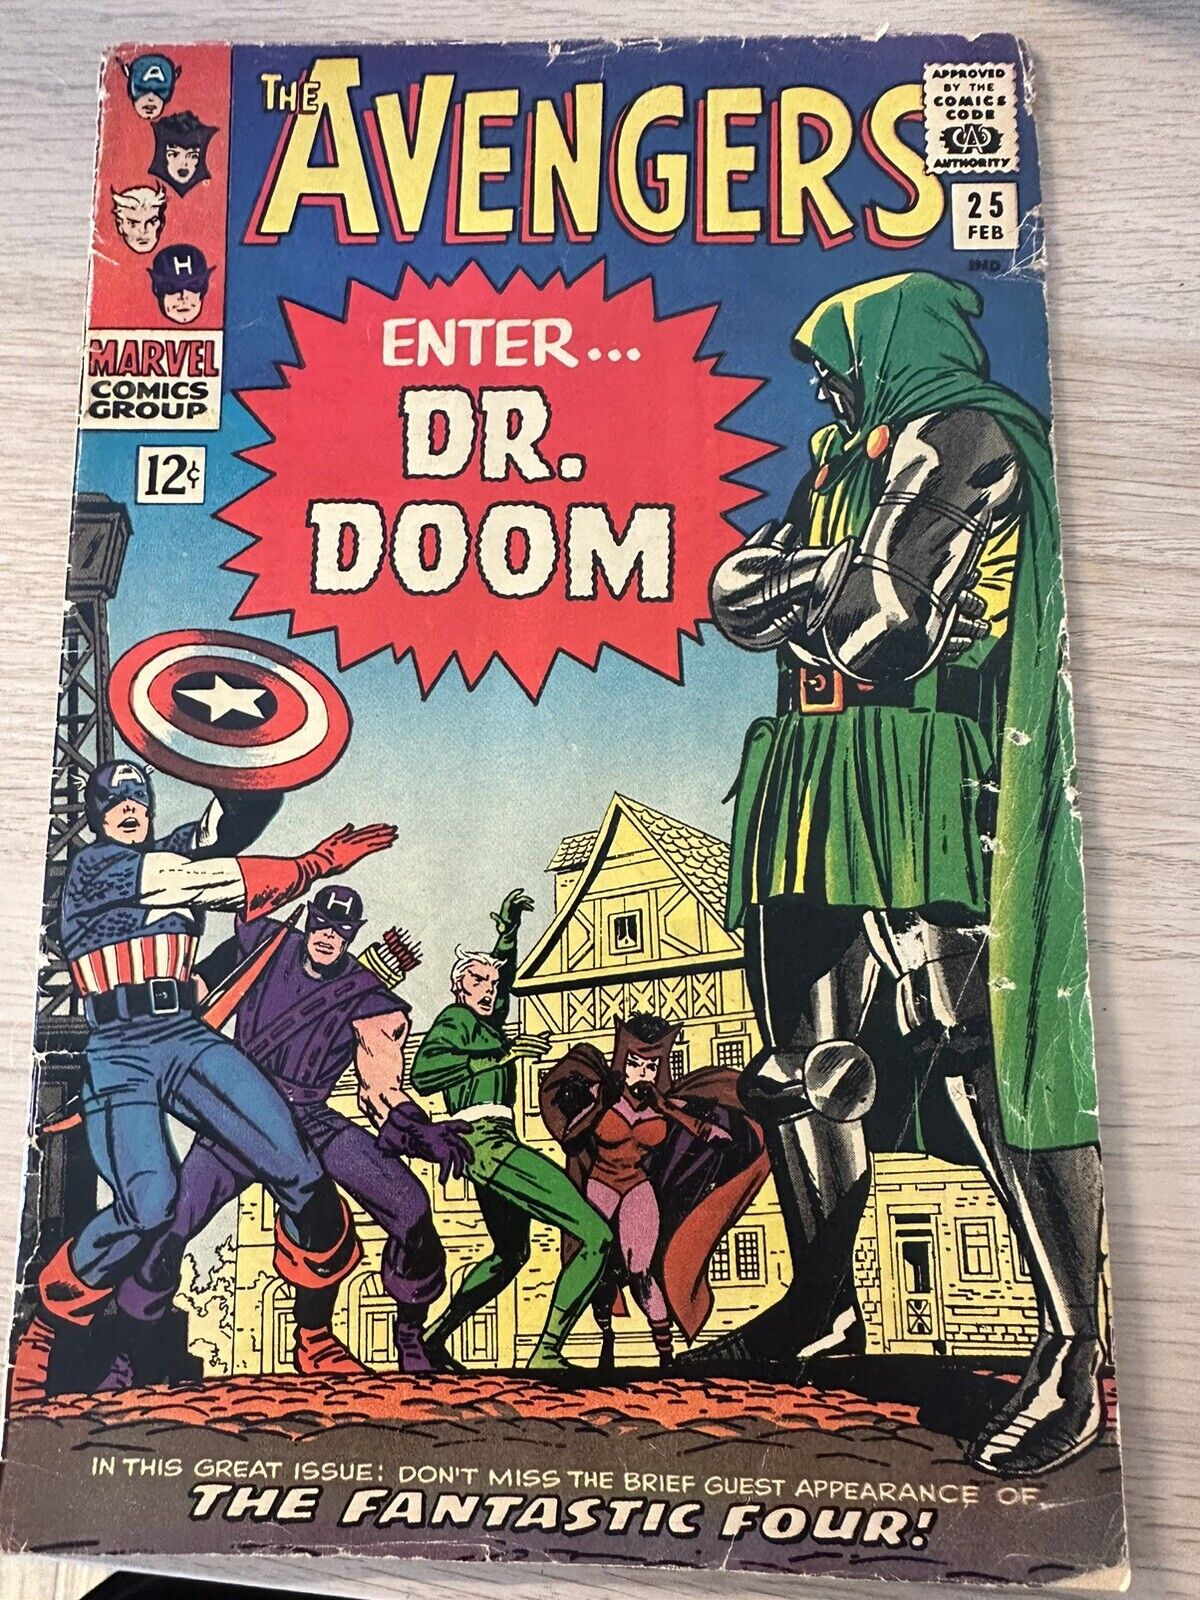 Old 1965 The Avengers #25 Marvel Silver Age comic book Enter Dr. Doom